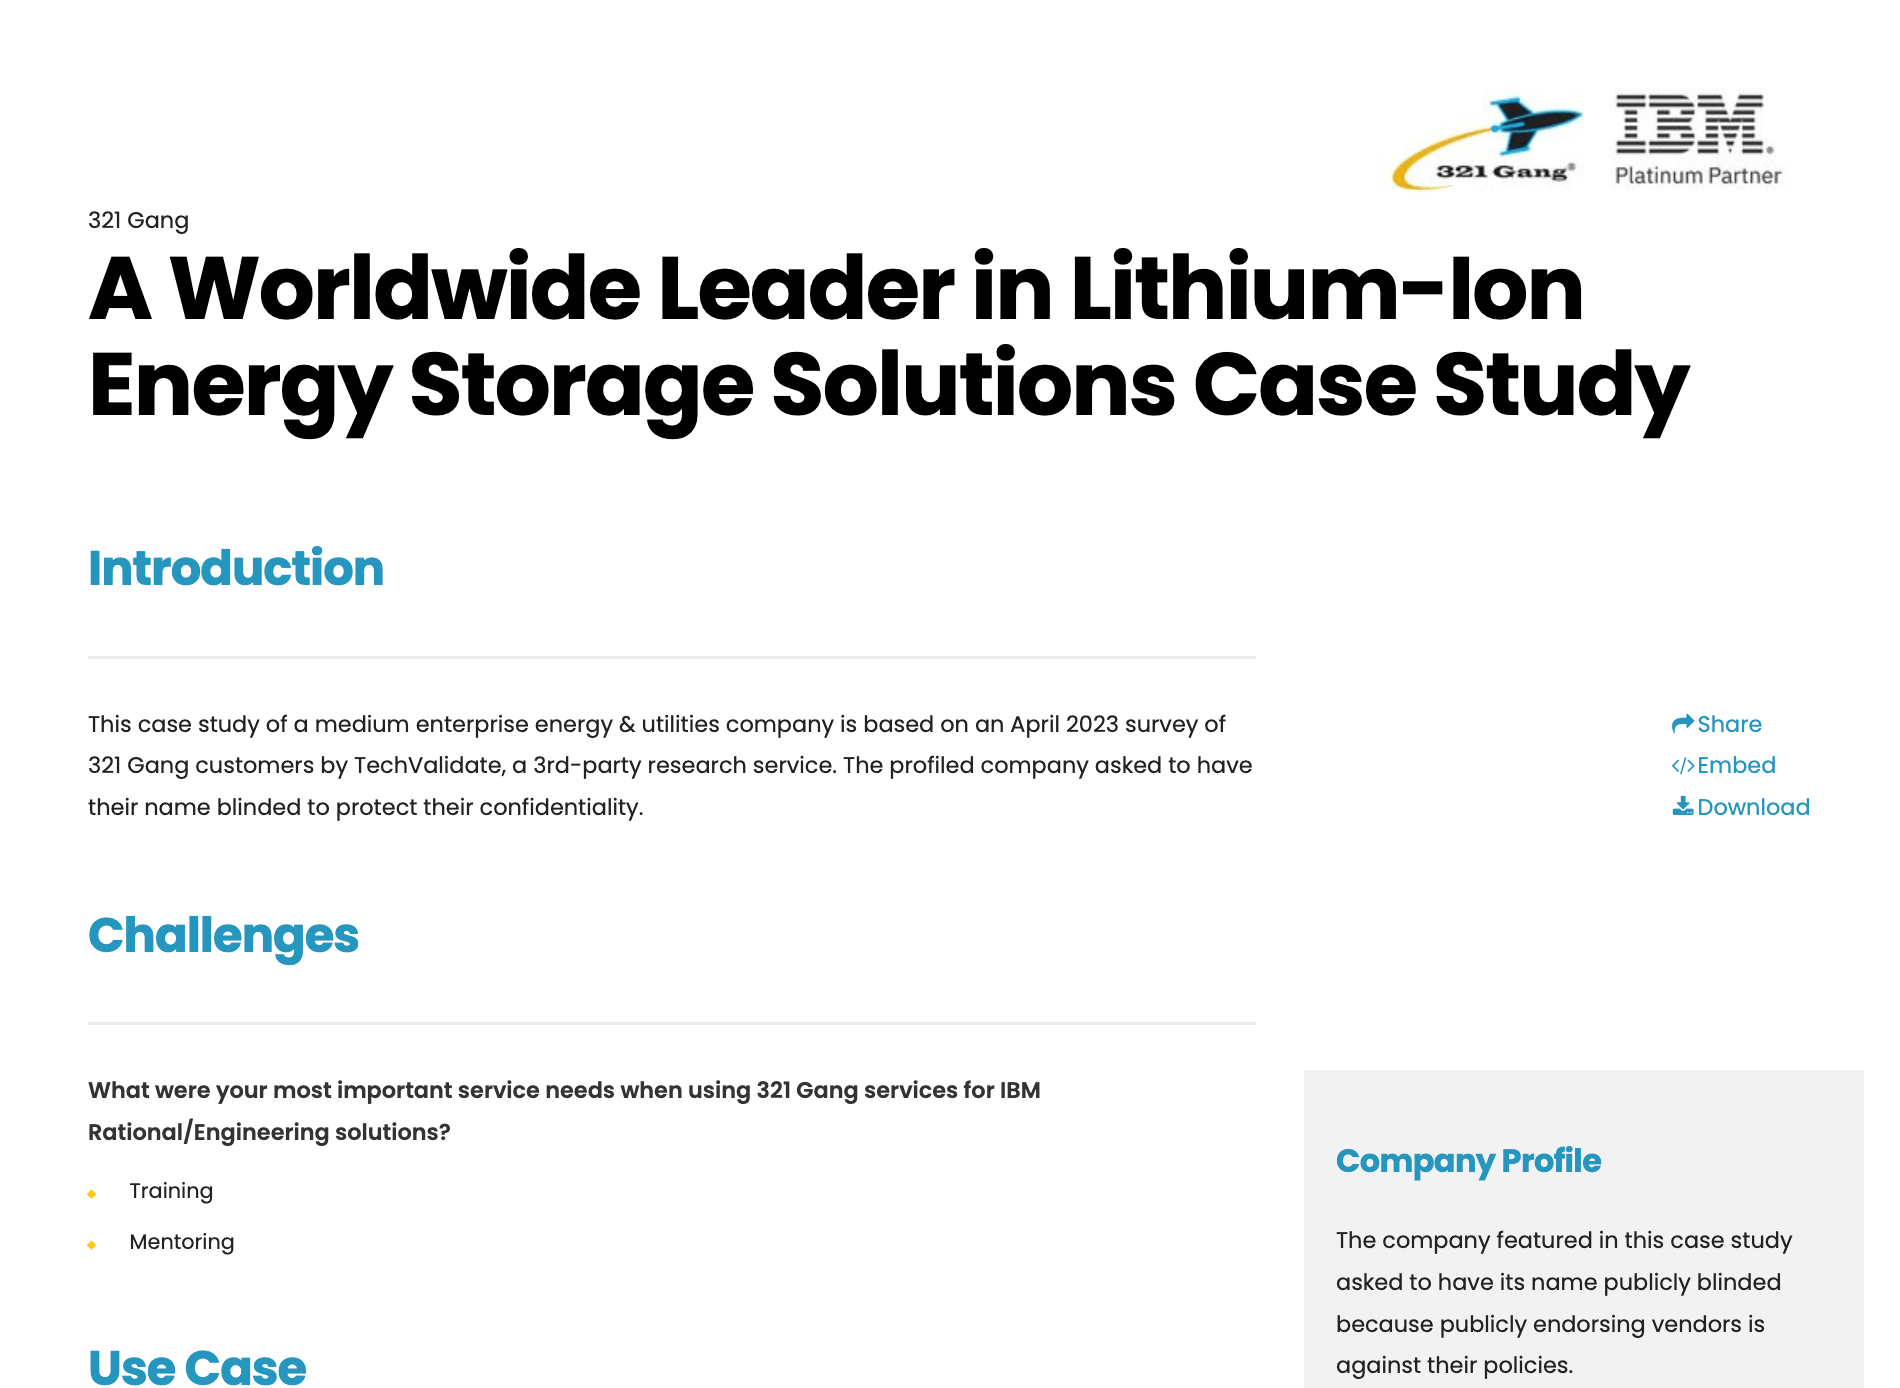 A Worldwide Leader in Lithium-Ion Energy Storage Solutions Case Study preview